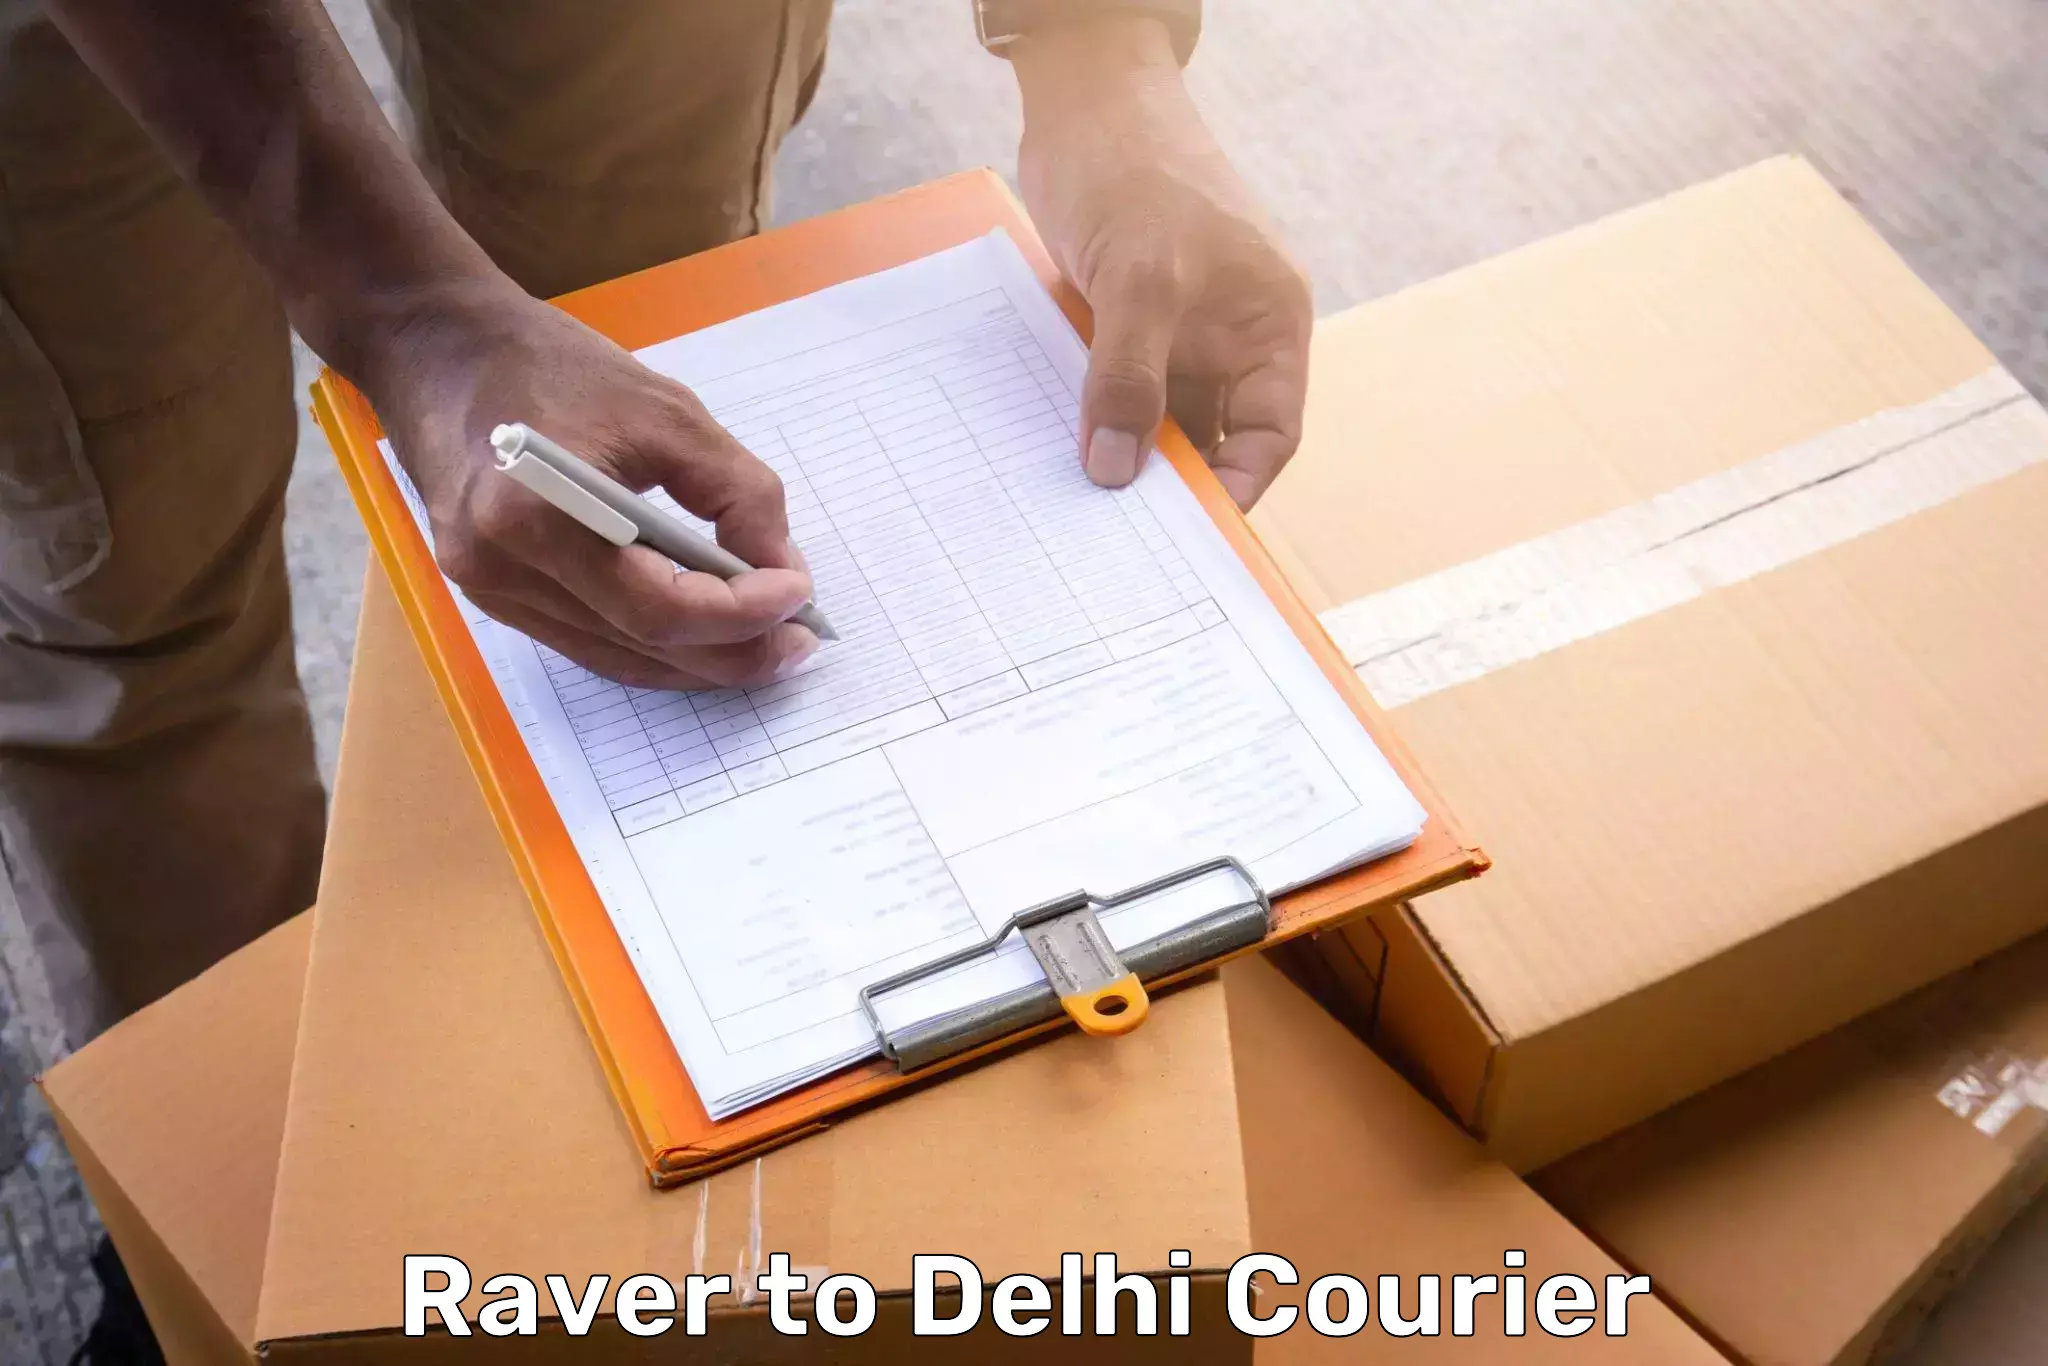 Luggage shipment specialists Raver to Lodhi Road